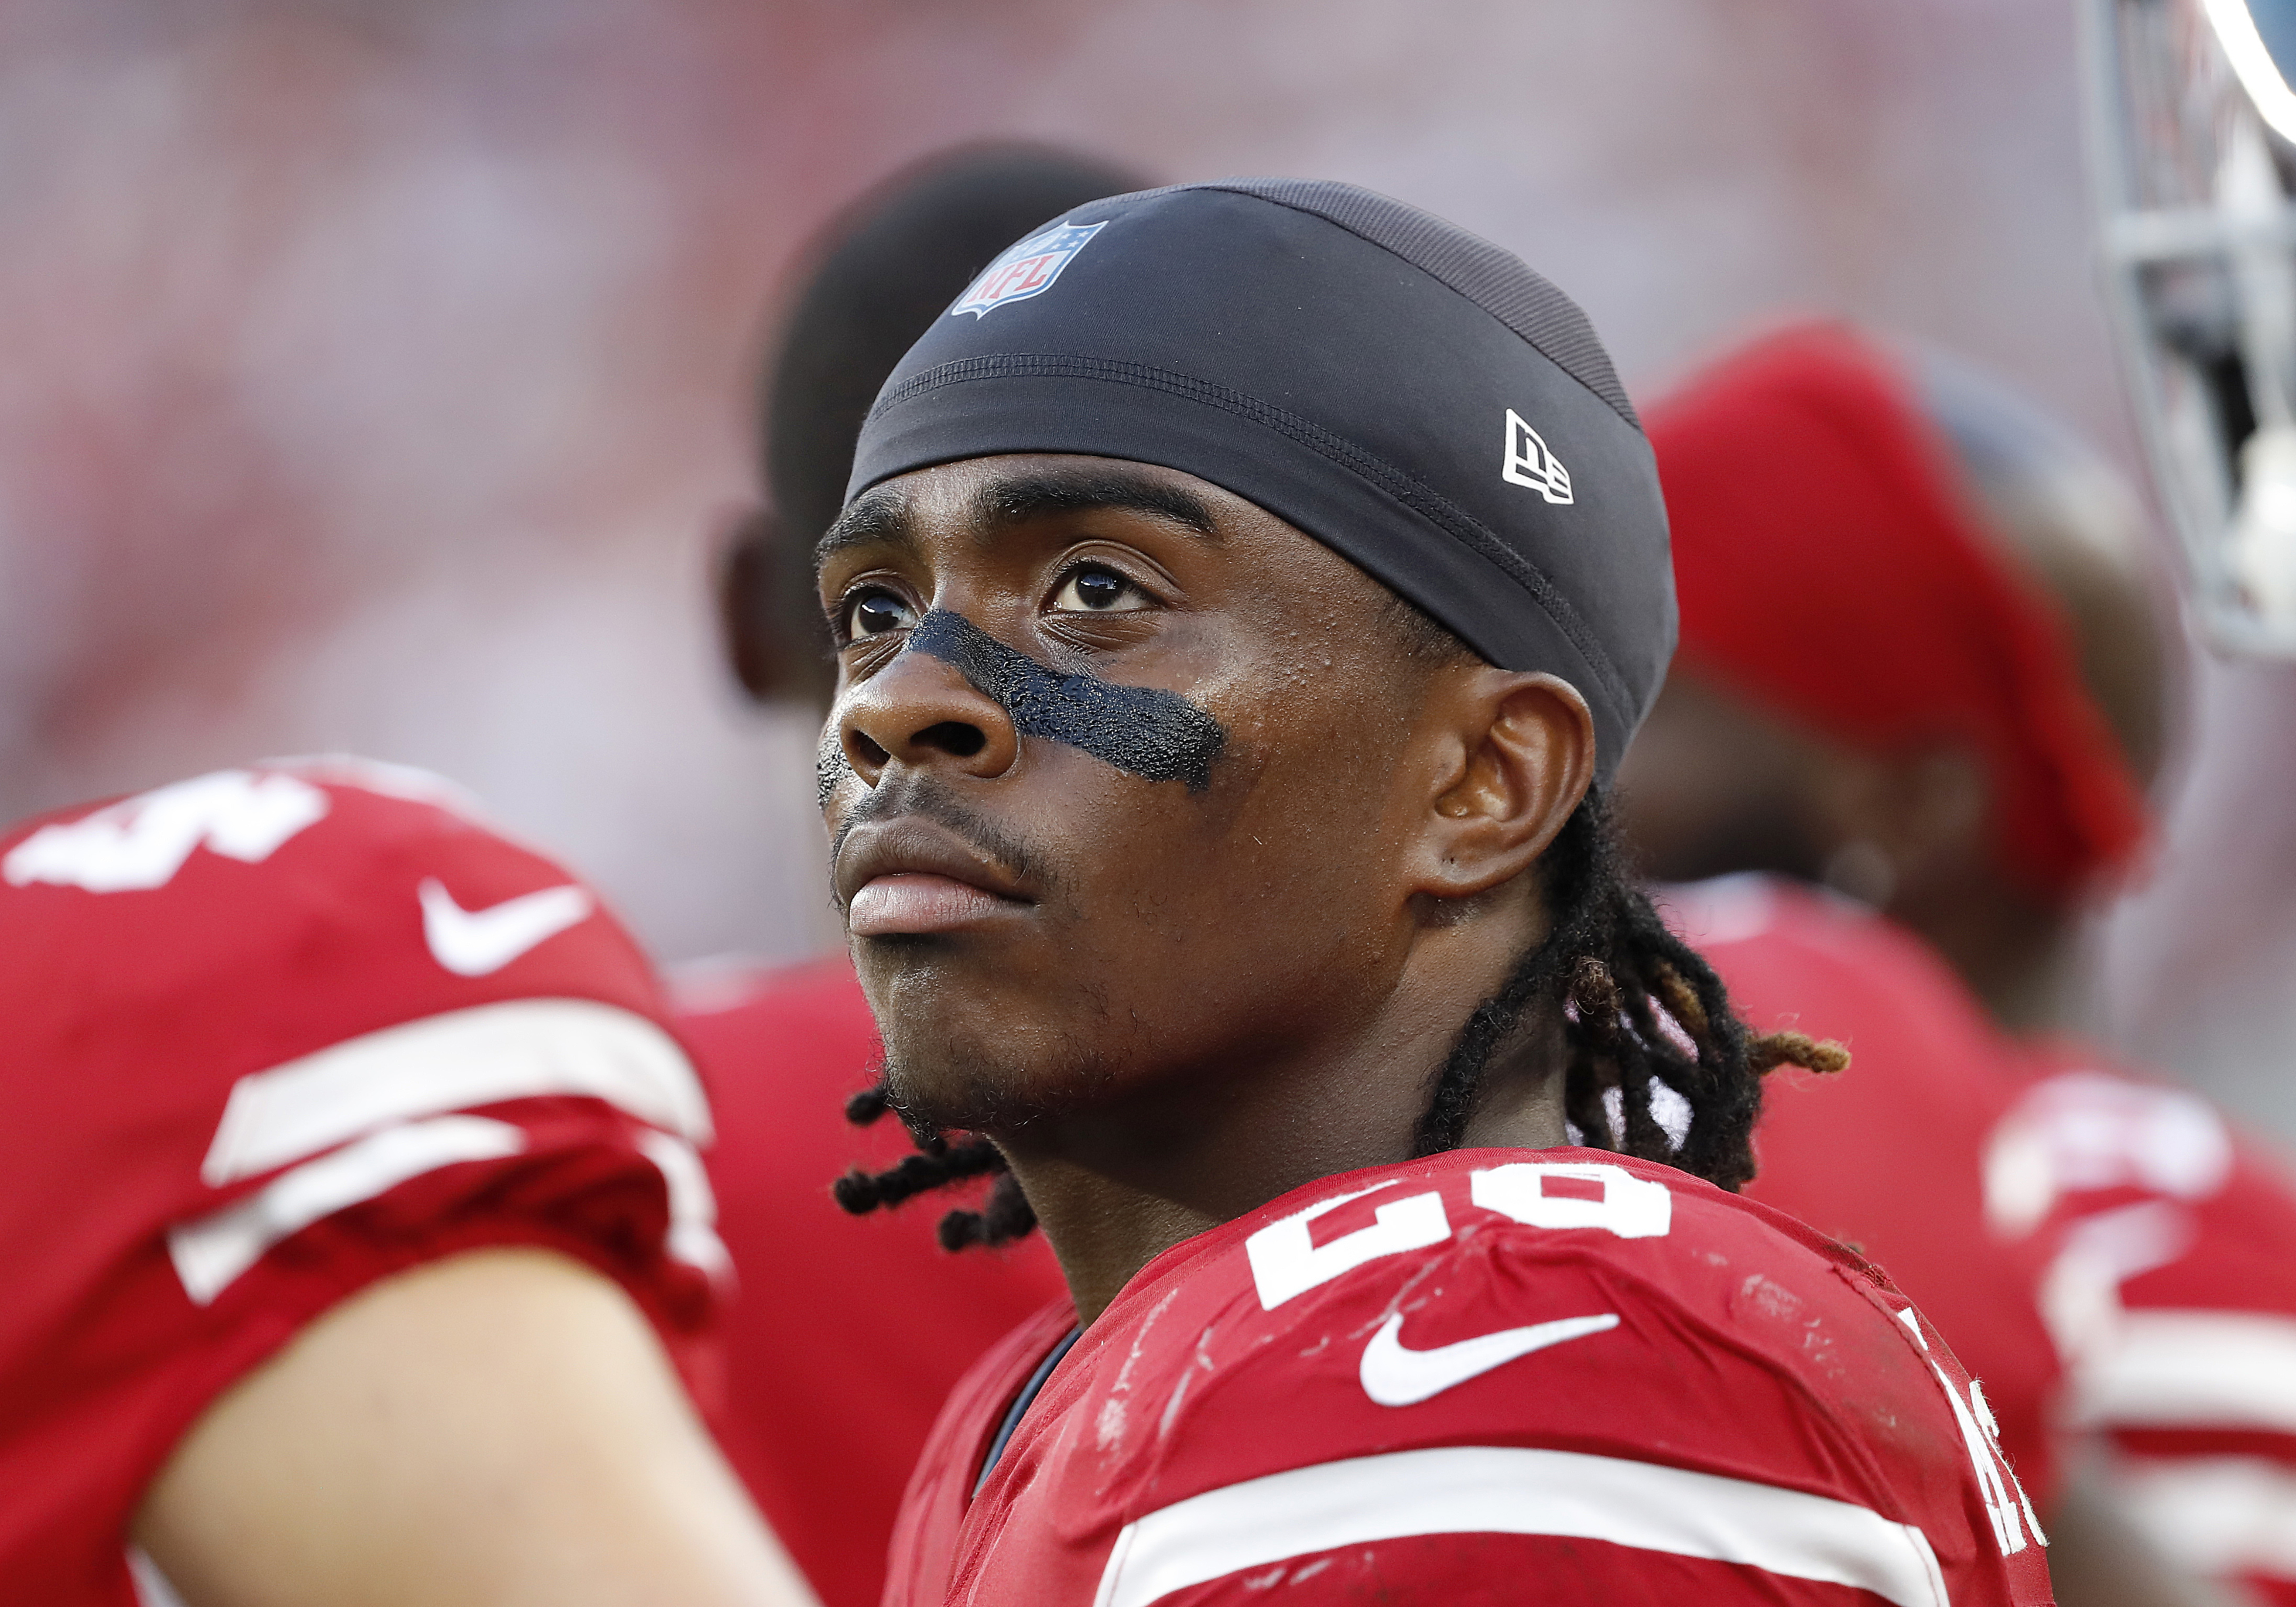 49ers RB Jerick McKinnon has setback in return from injury